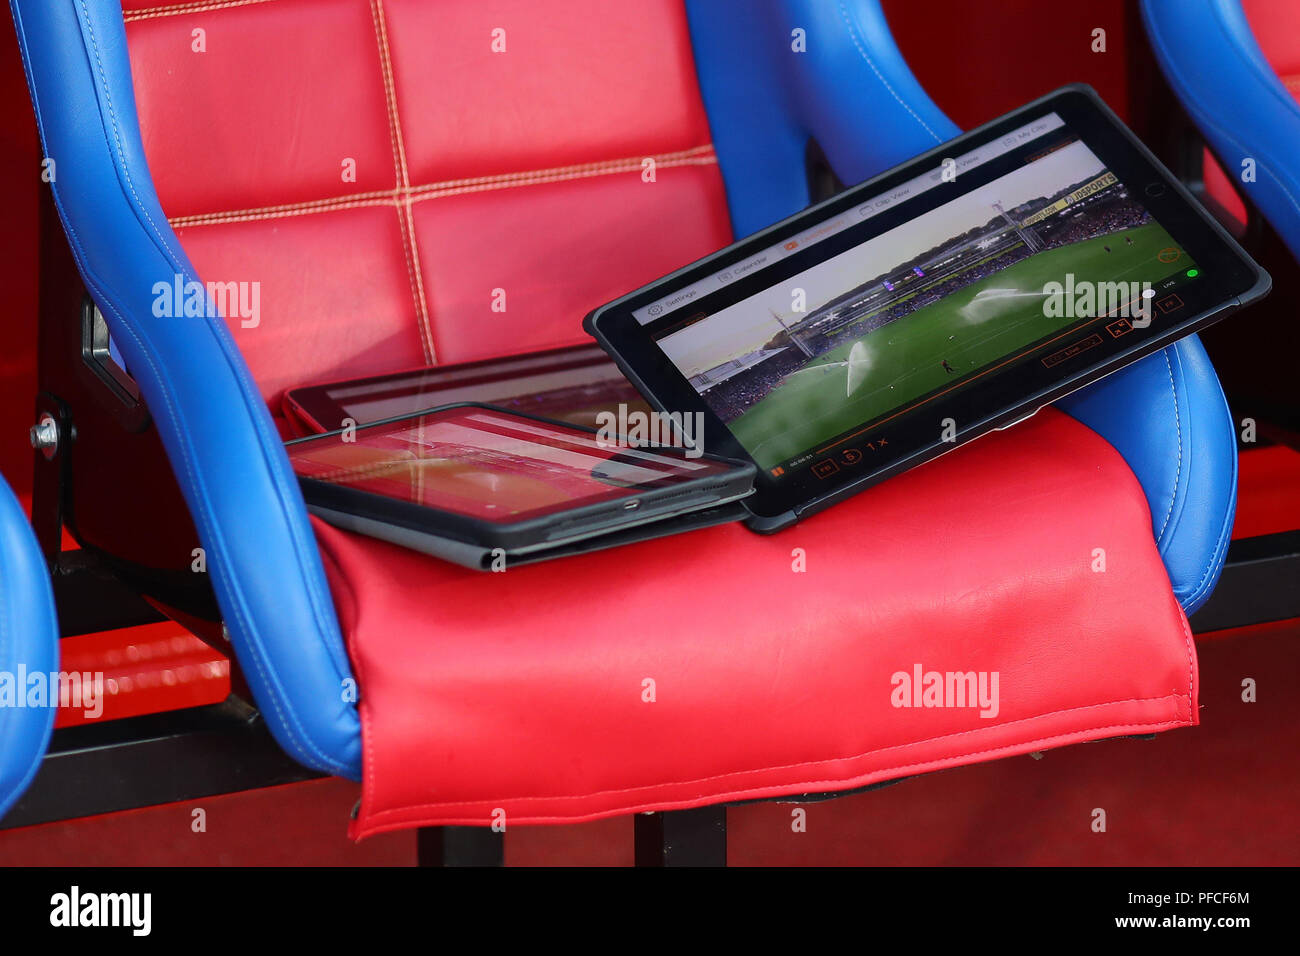 iPad tablets on the substitutes bench - Crystal Palace v Liverpool, Premier  League, Selhurst Park, London (Selhurst) - 20th August 2018 Stock Photo -  Alamy